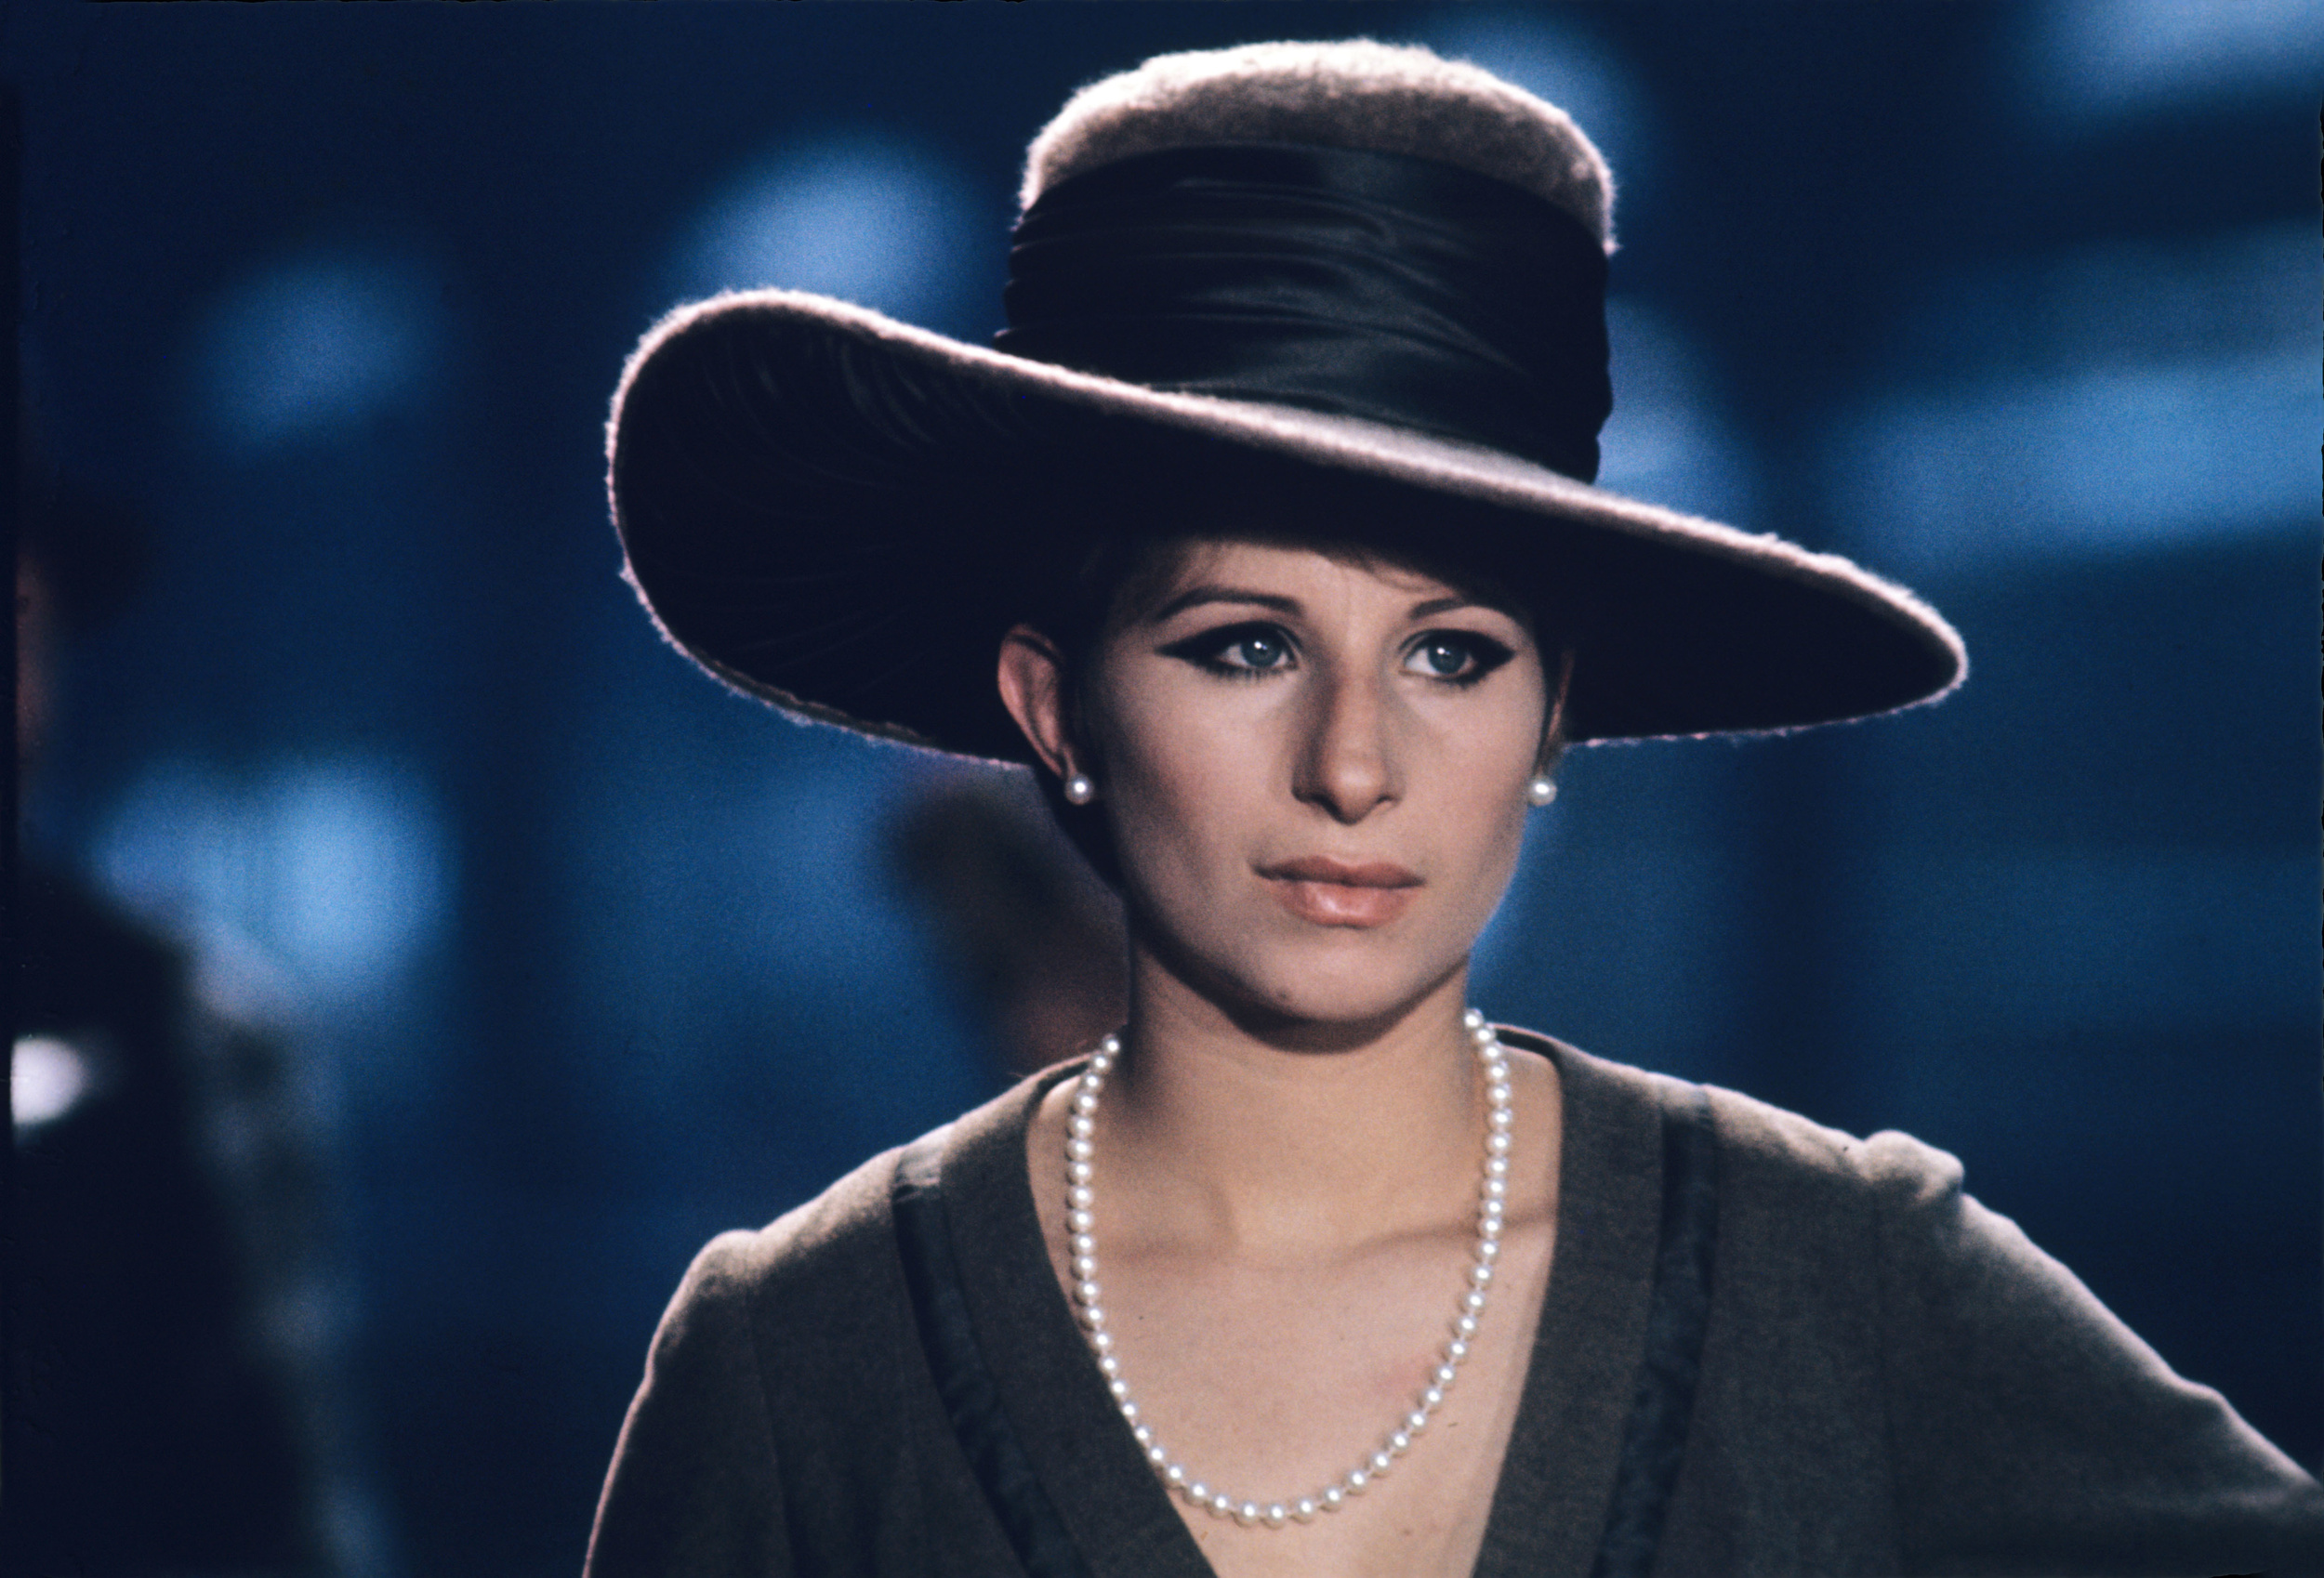 <p>When the American Film Institute made their list of the 100 best movie quotes of all time, at No. 81 was “Hello, gorgeous.” It is one of the rare opening lines on that list. When Barbra Streisand won the Oscar for starring in <em>Funny Girl</em>, she dropped the line in her speech. Even if you have never seen <em>Funny Girl</em>, you know the line “Hello, gorgeous.”</p><p><a href='https://www.msn.com/en-us/community/channel/vid-cj9pqbr0vn9in2b6ddcd8sfgpfq6x6utp44fssrv6mc2gtybw0us'>Follow us on MSN to see more of our exclusive entertainment content.</a></p>